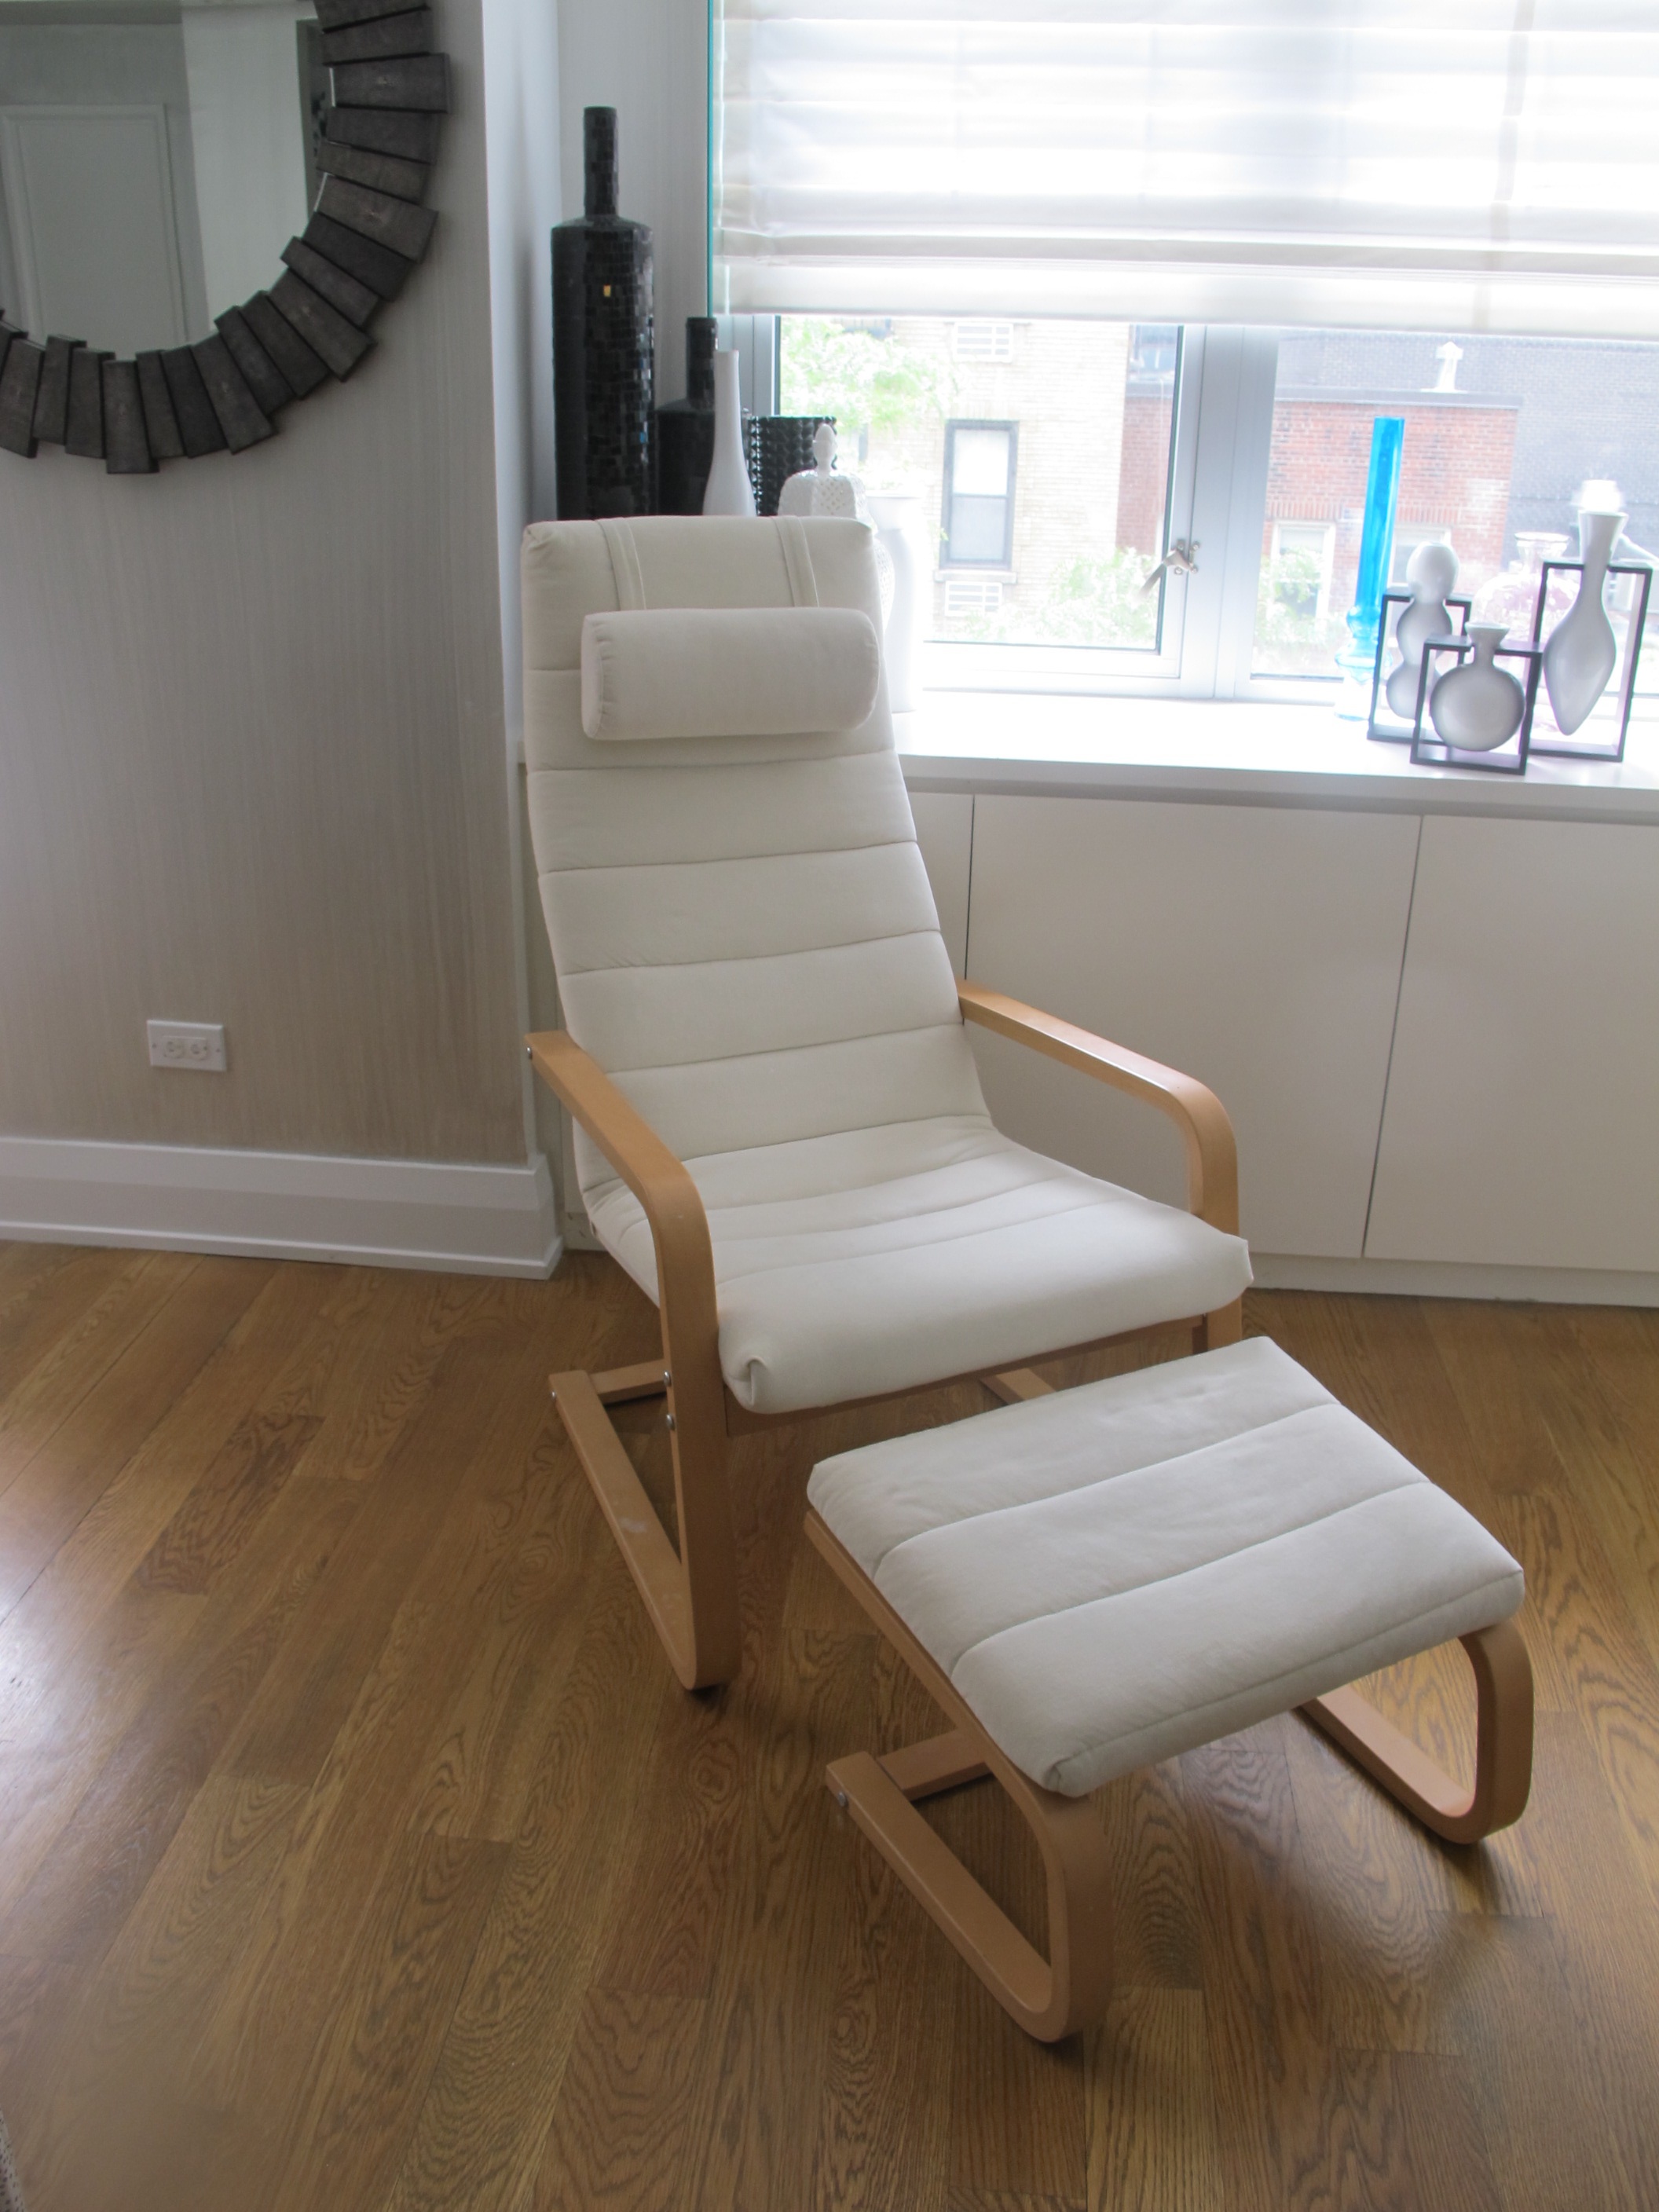 Ikea Chair With Ottoman | The Best Chair Review Blog